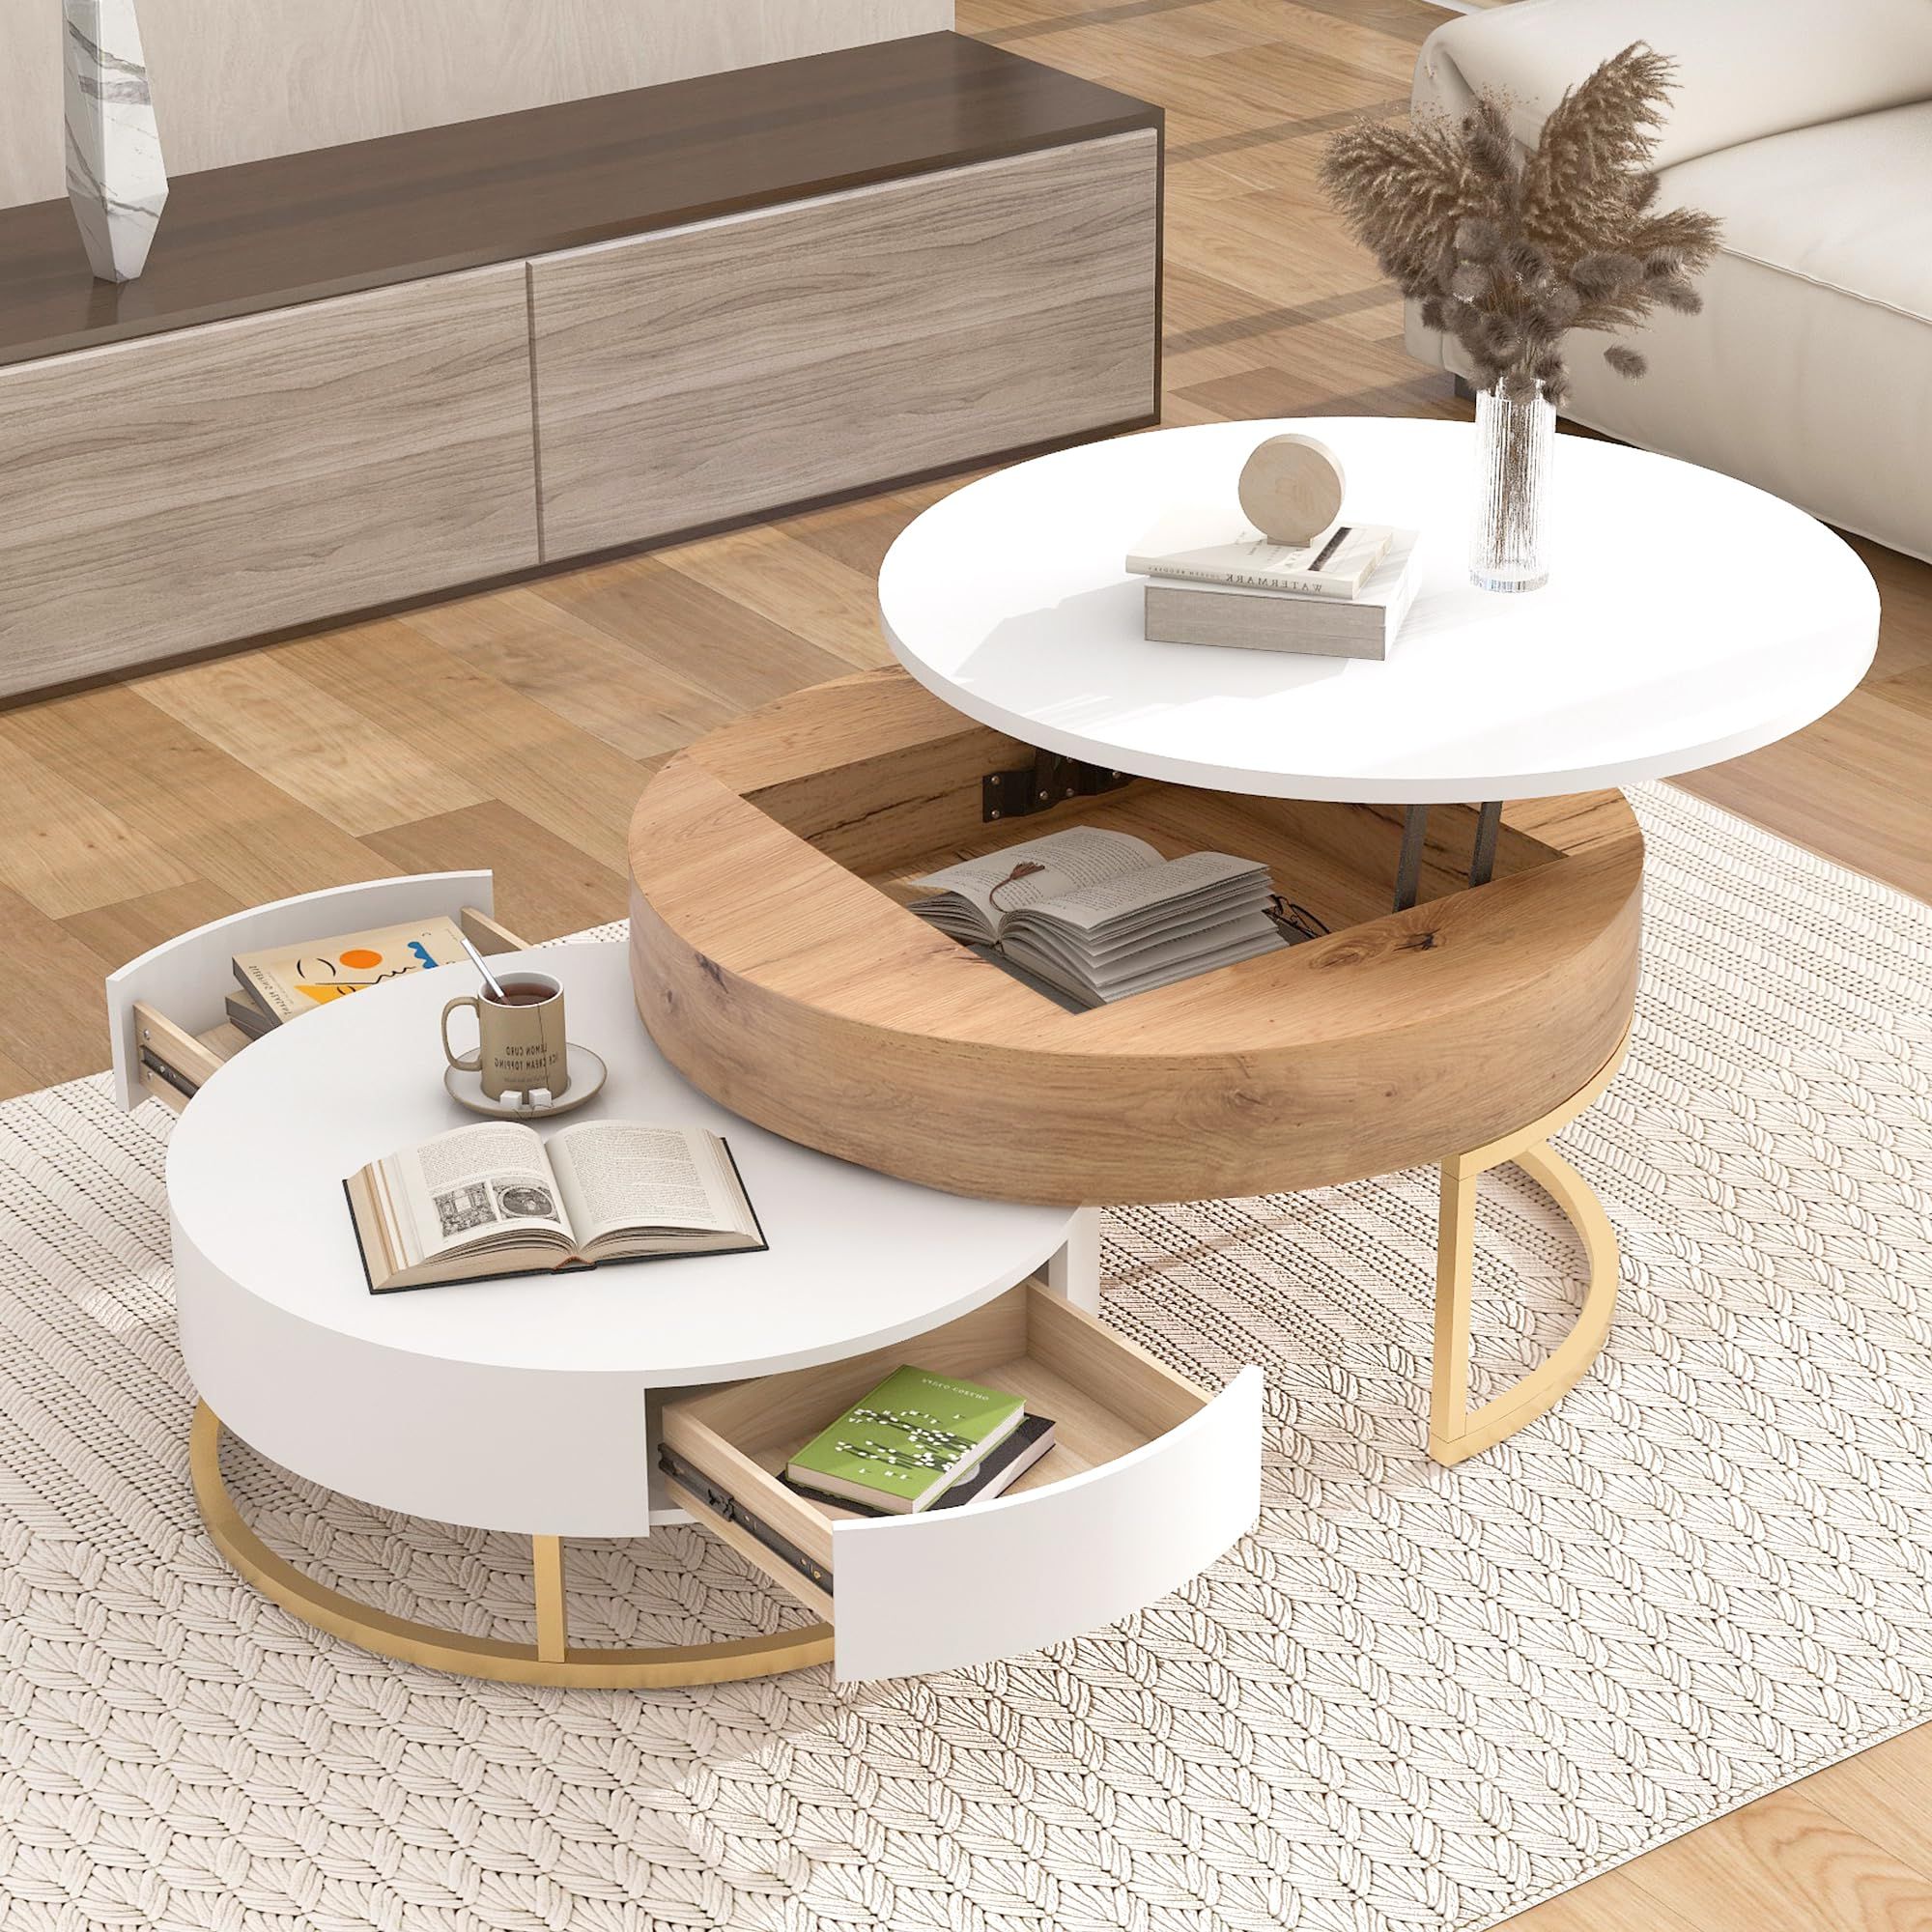 Widely Used Amazon: Lz Leisure Zone Lift Top Coffee Table, Round Nesting Coffee  Table With Storage Drawers, Modern Unique Coffee Tables For Living Room,  Oak Natural Wood + Antique White : Home & Kitchen Throughout Round Coffee Tables With Storage (Photo 5 of 10)